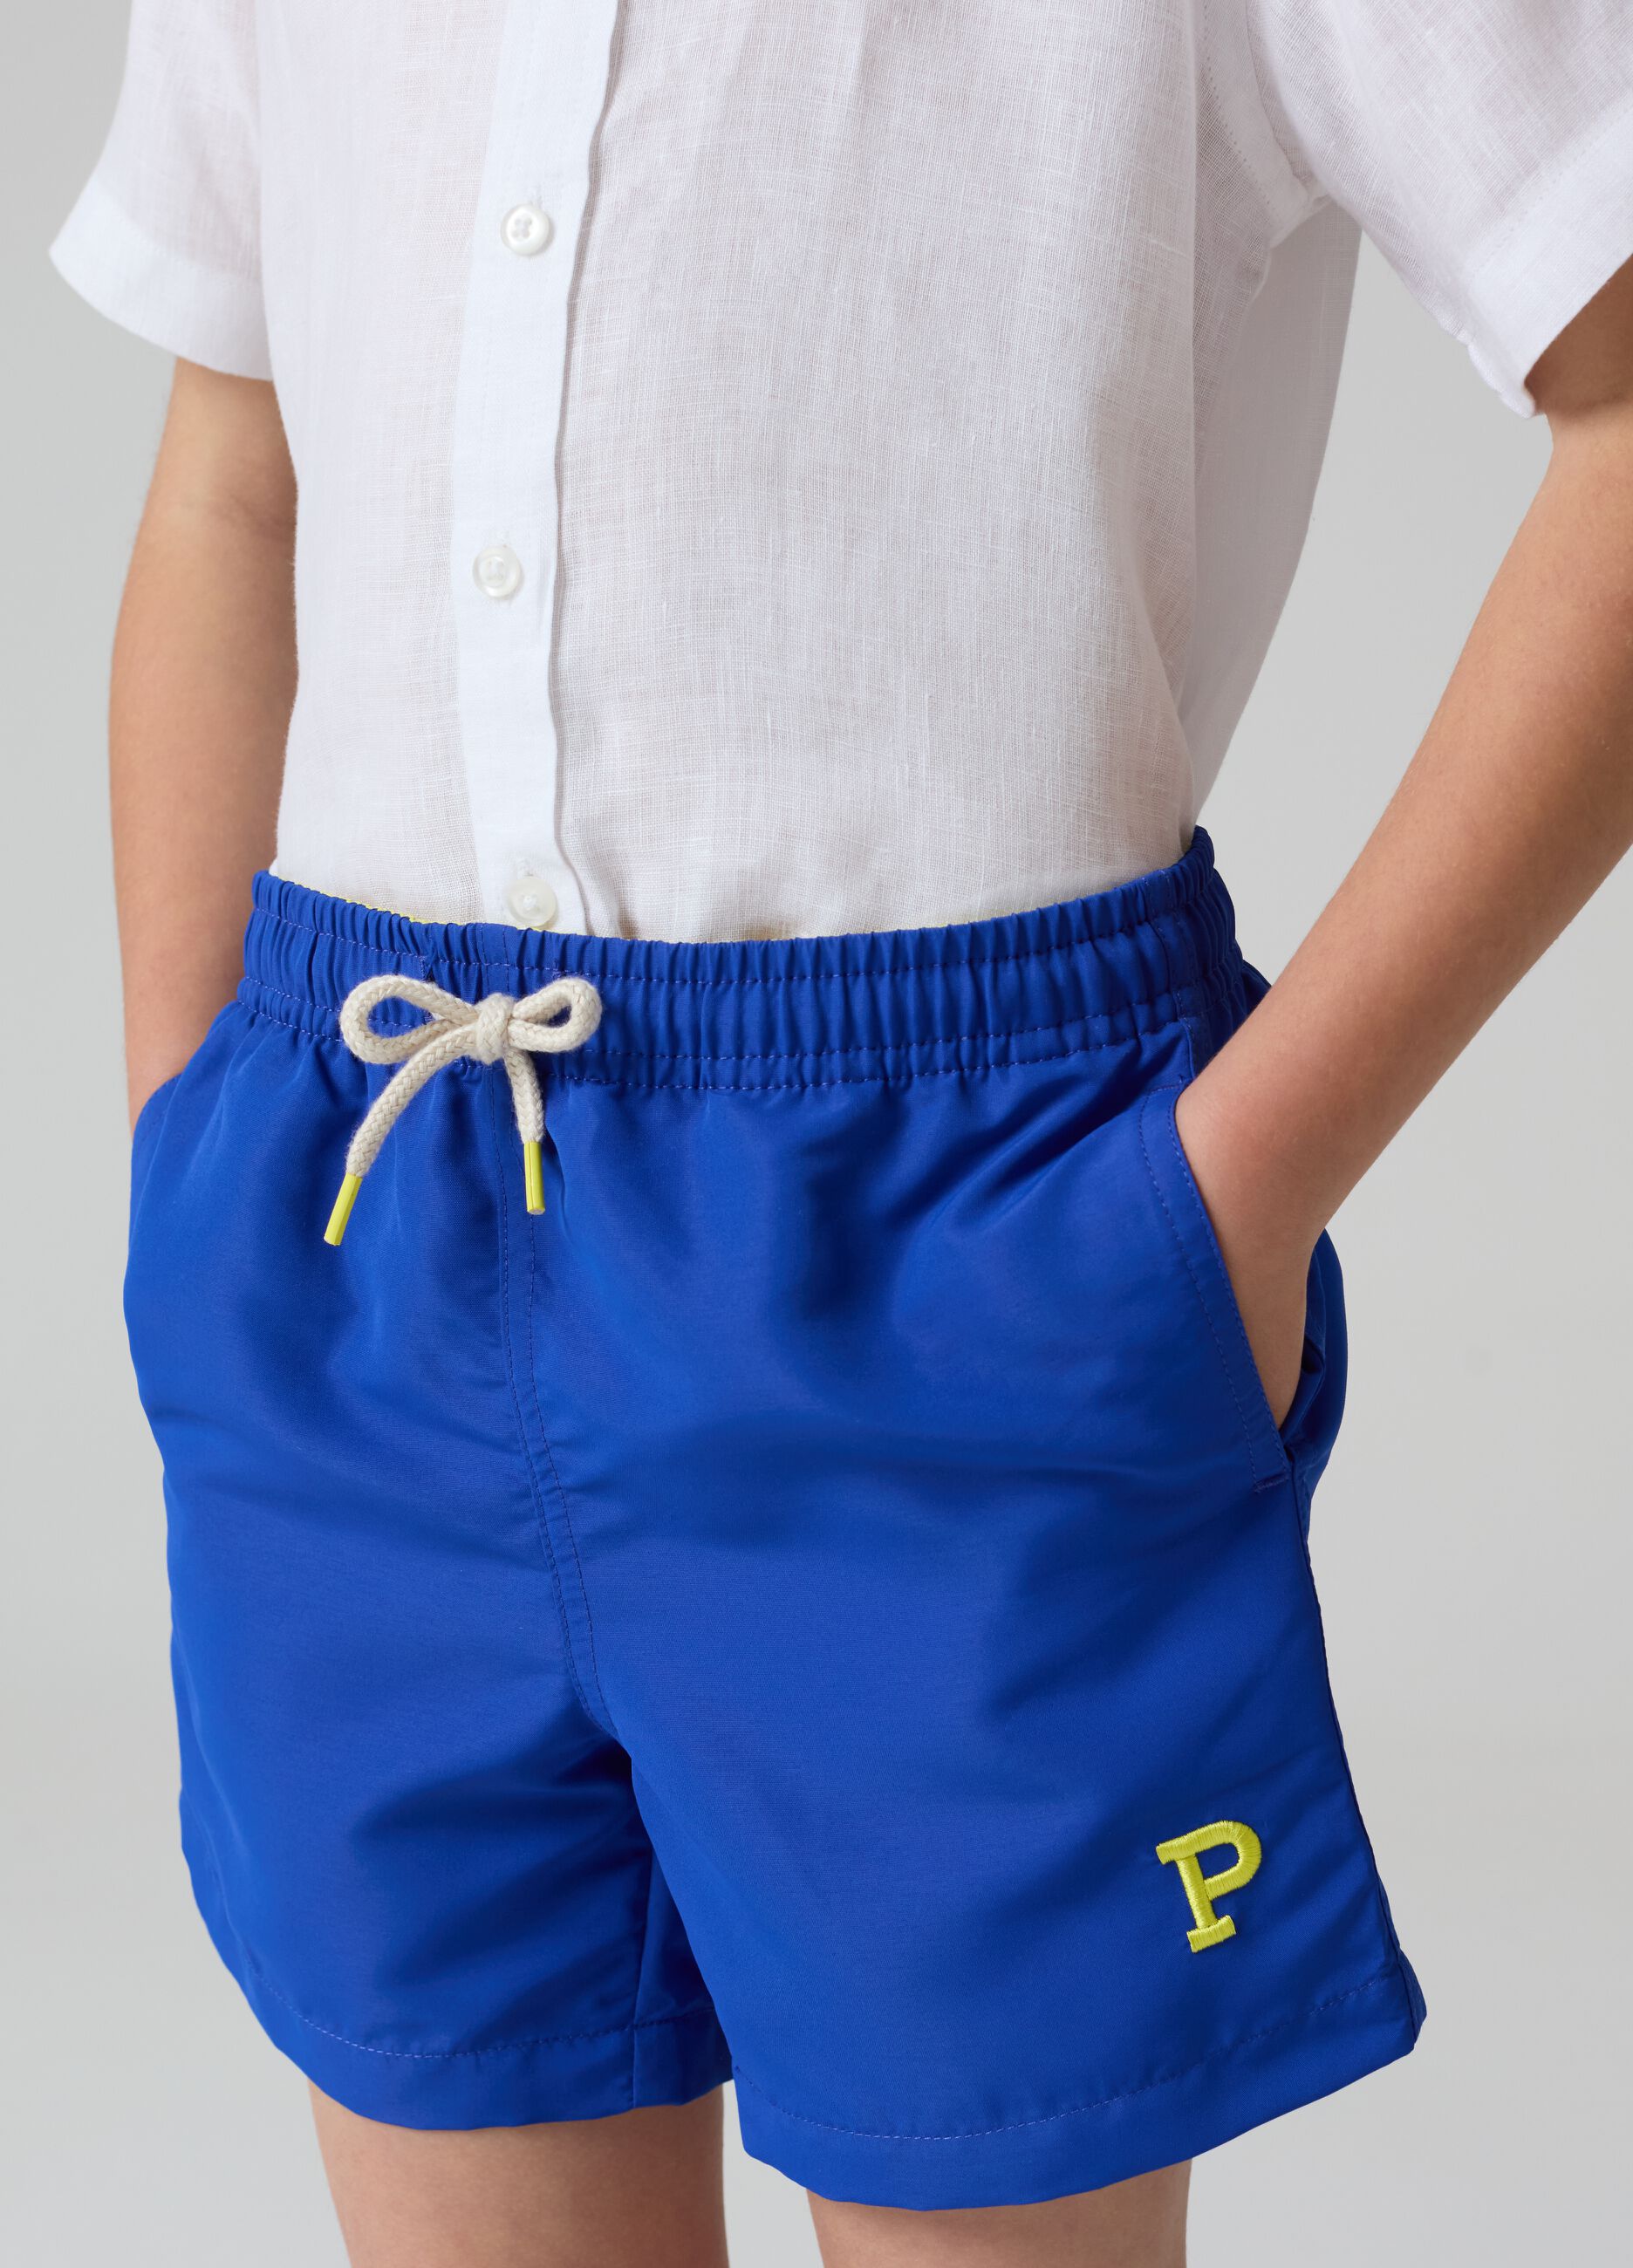 Swimming trunks with drawstring and logo embroidery